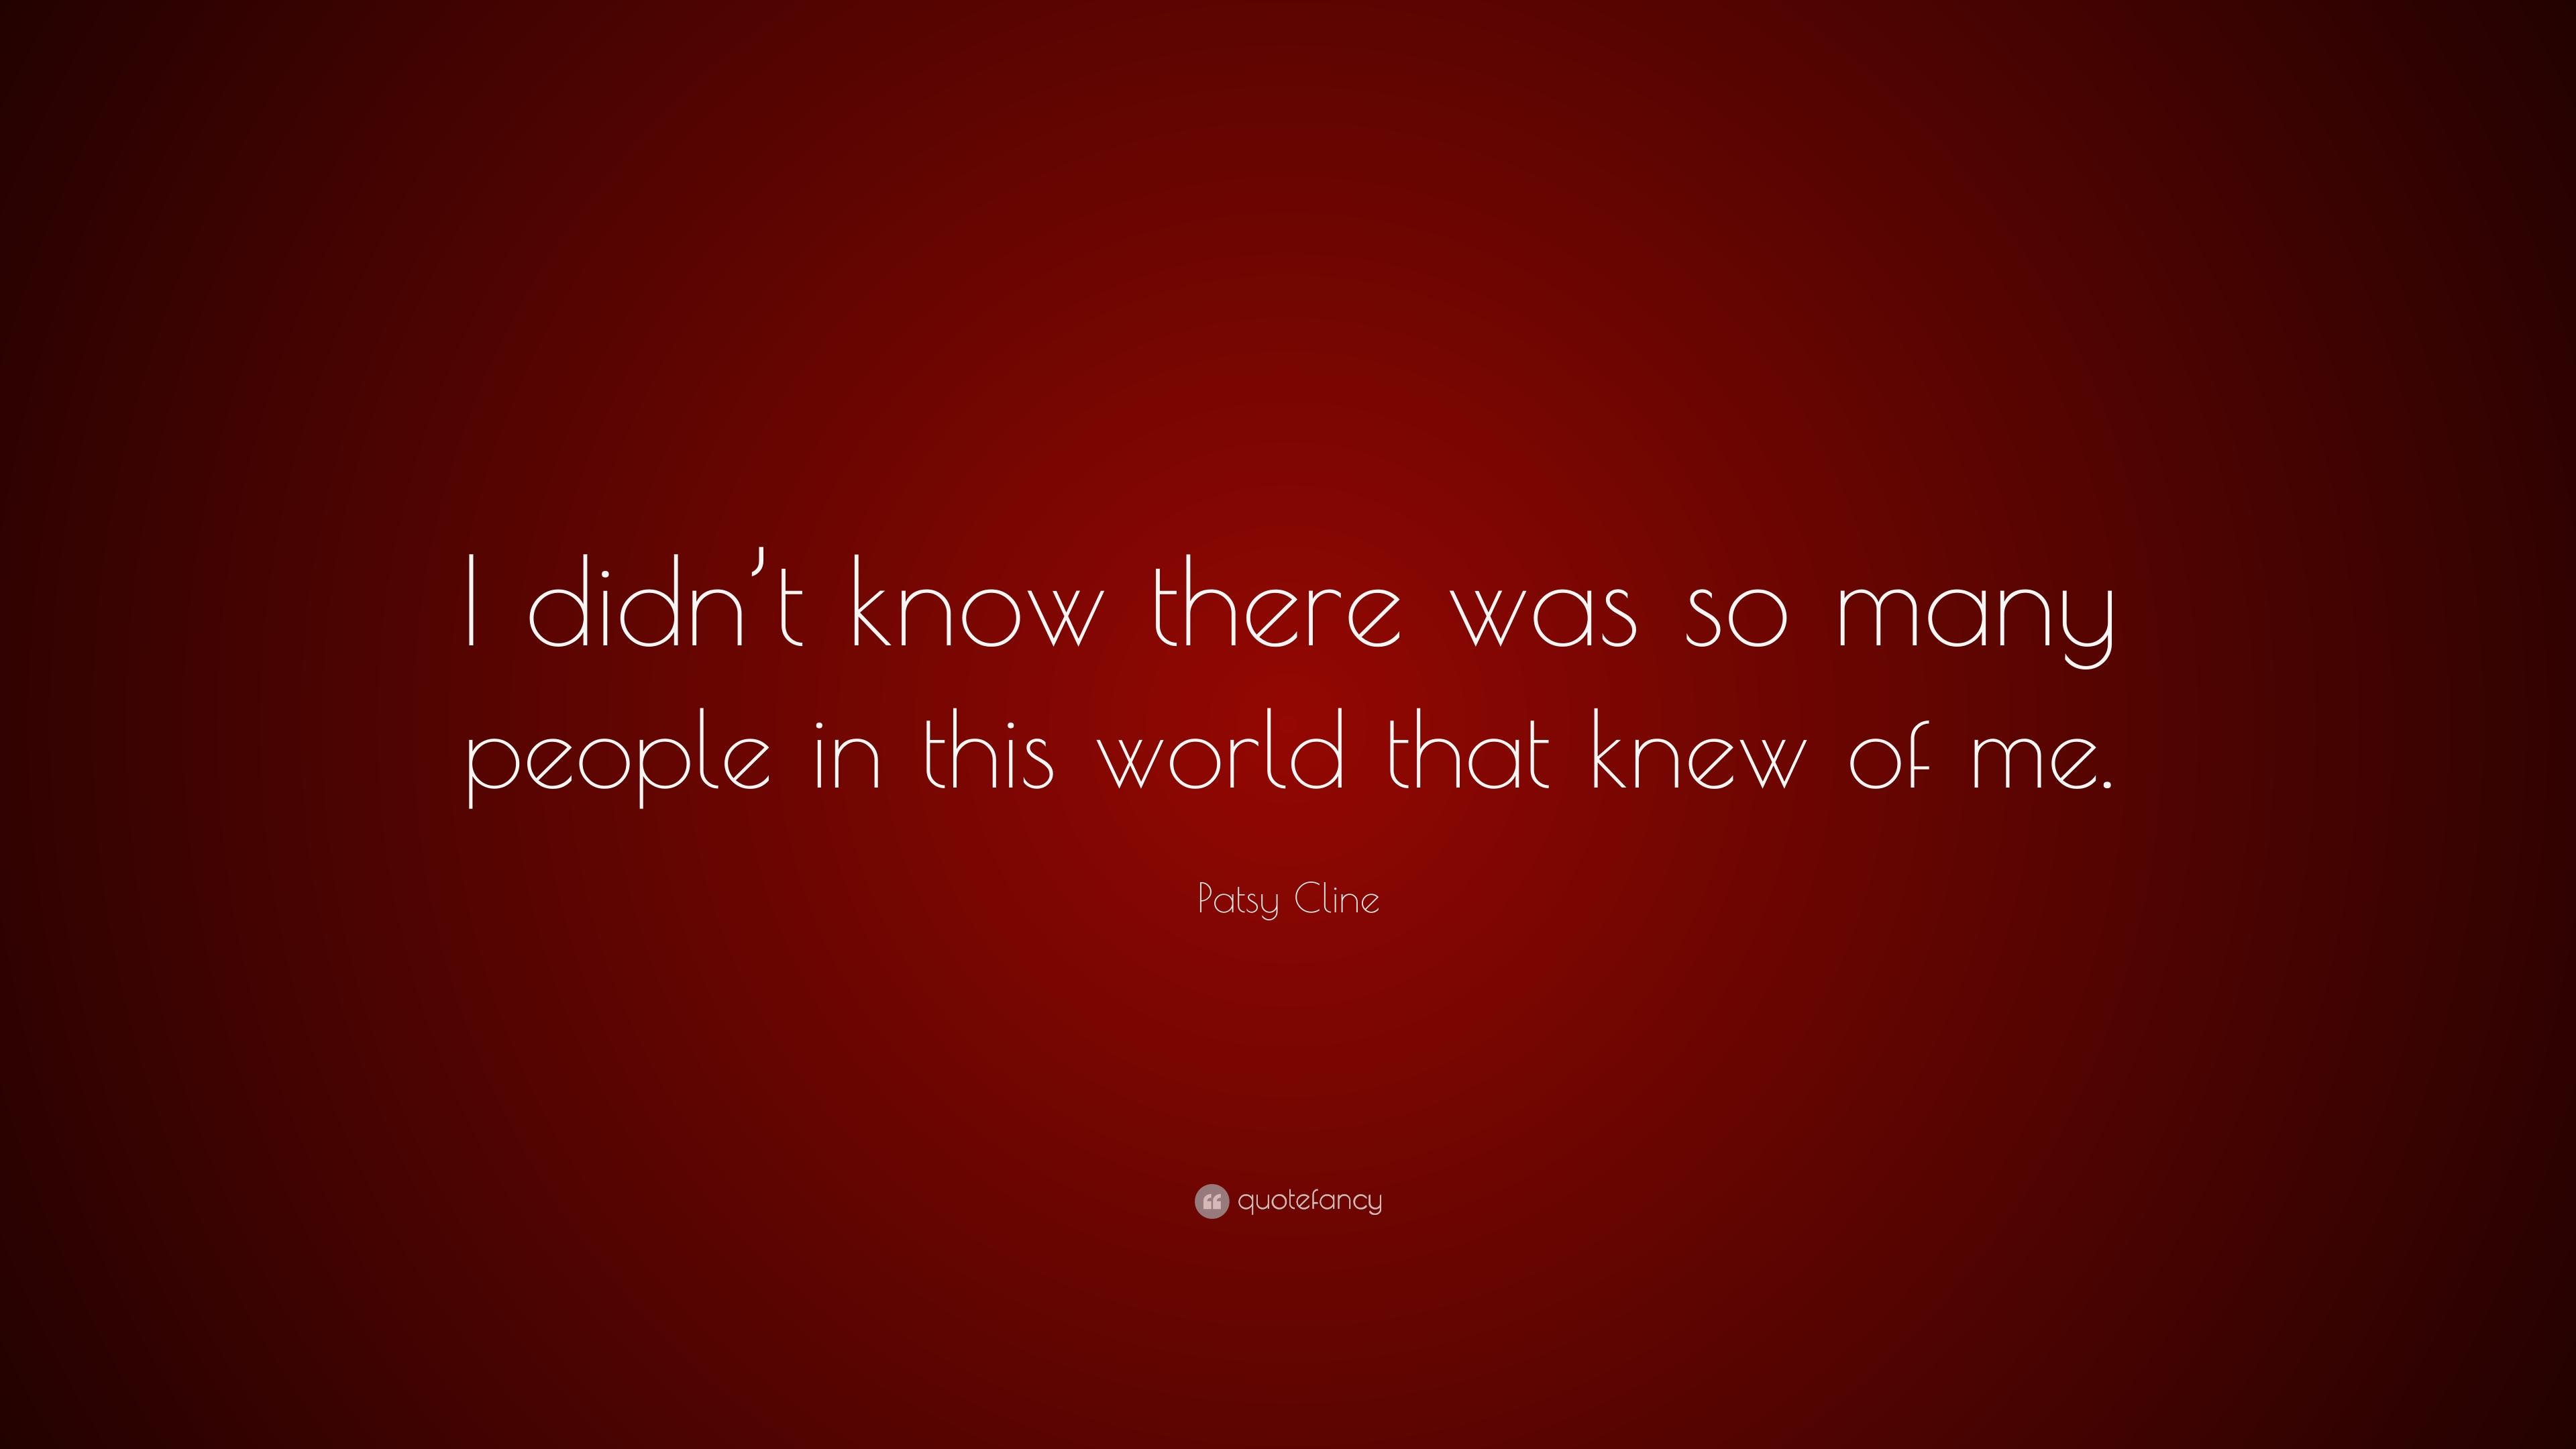 Patsy Cline Quote: “I didn't know there was so many people in this